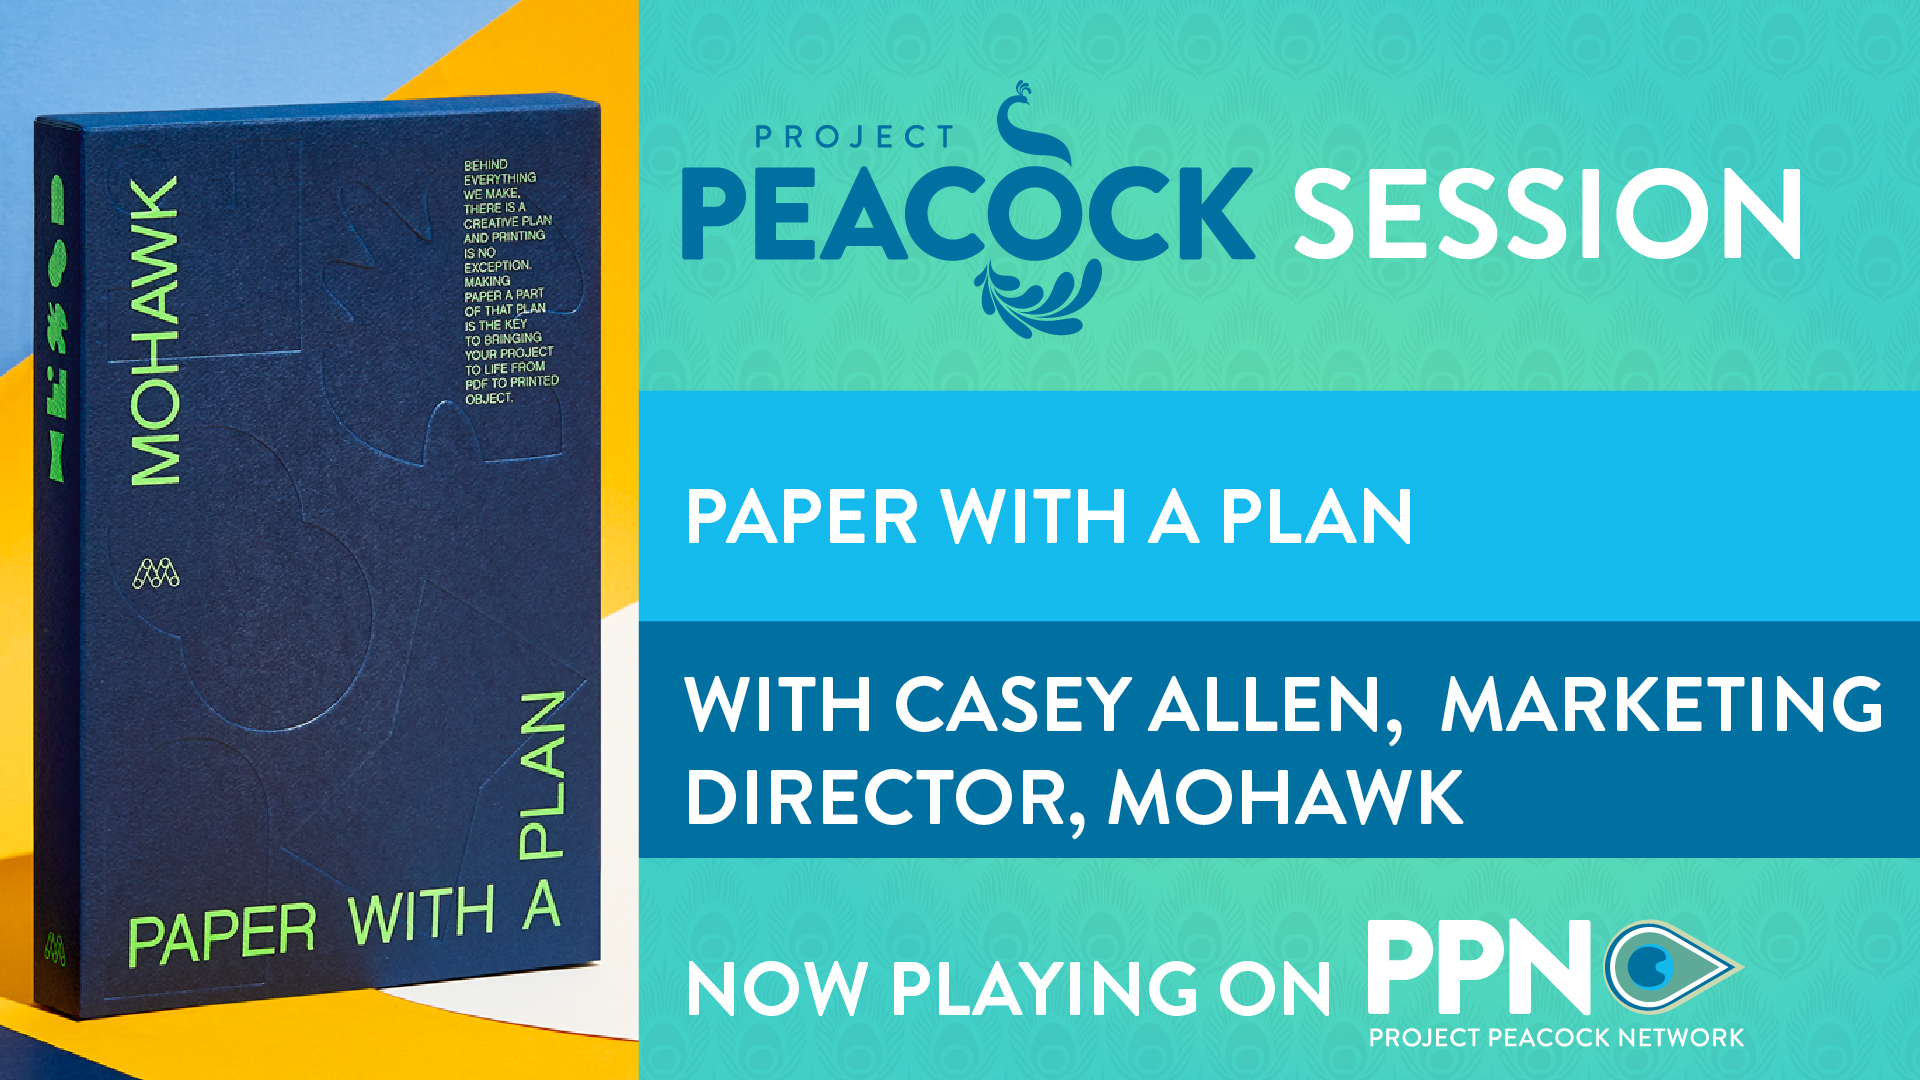 Paper With a Plan with Casey Allen, Mohawk